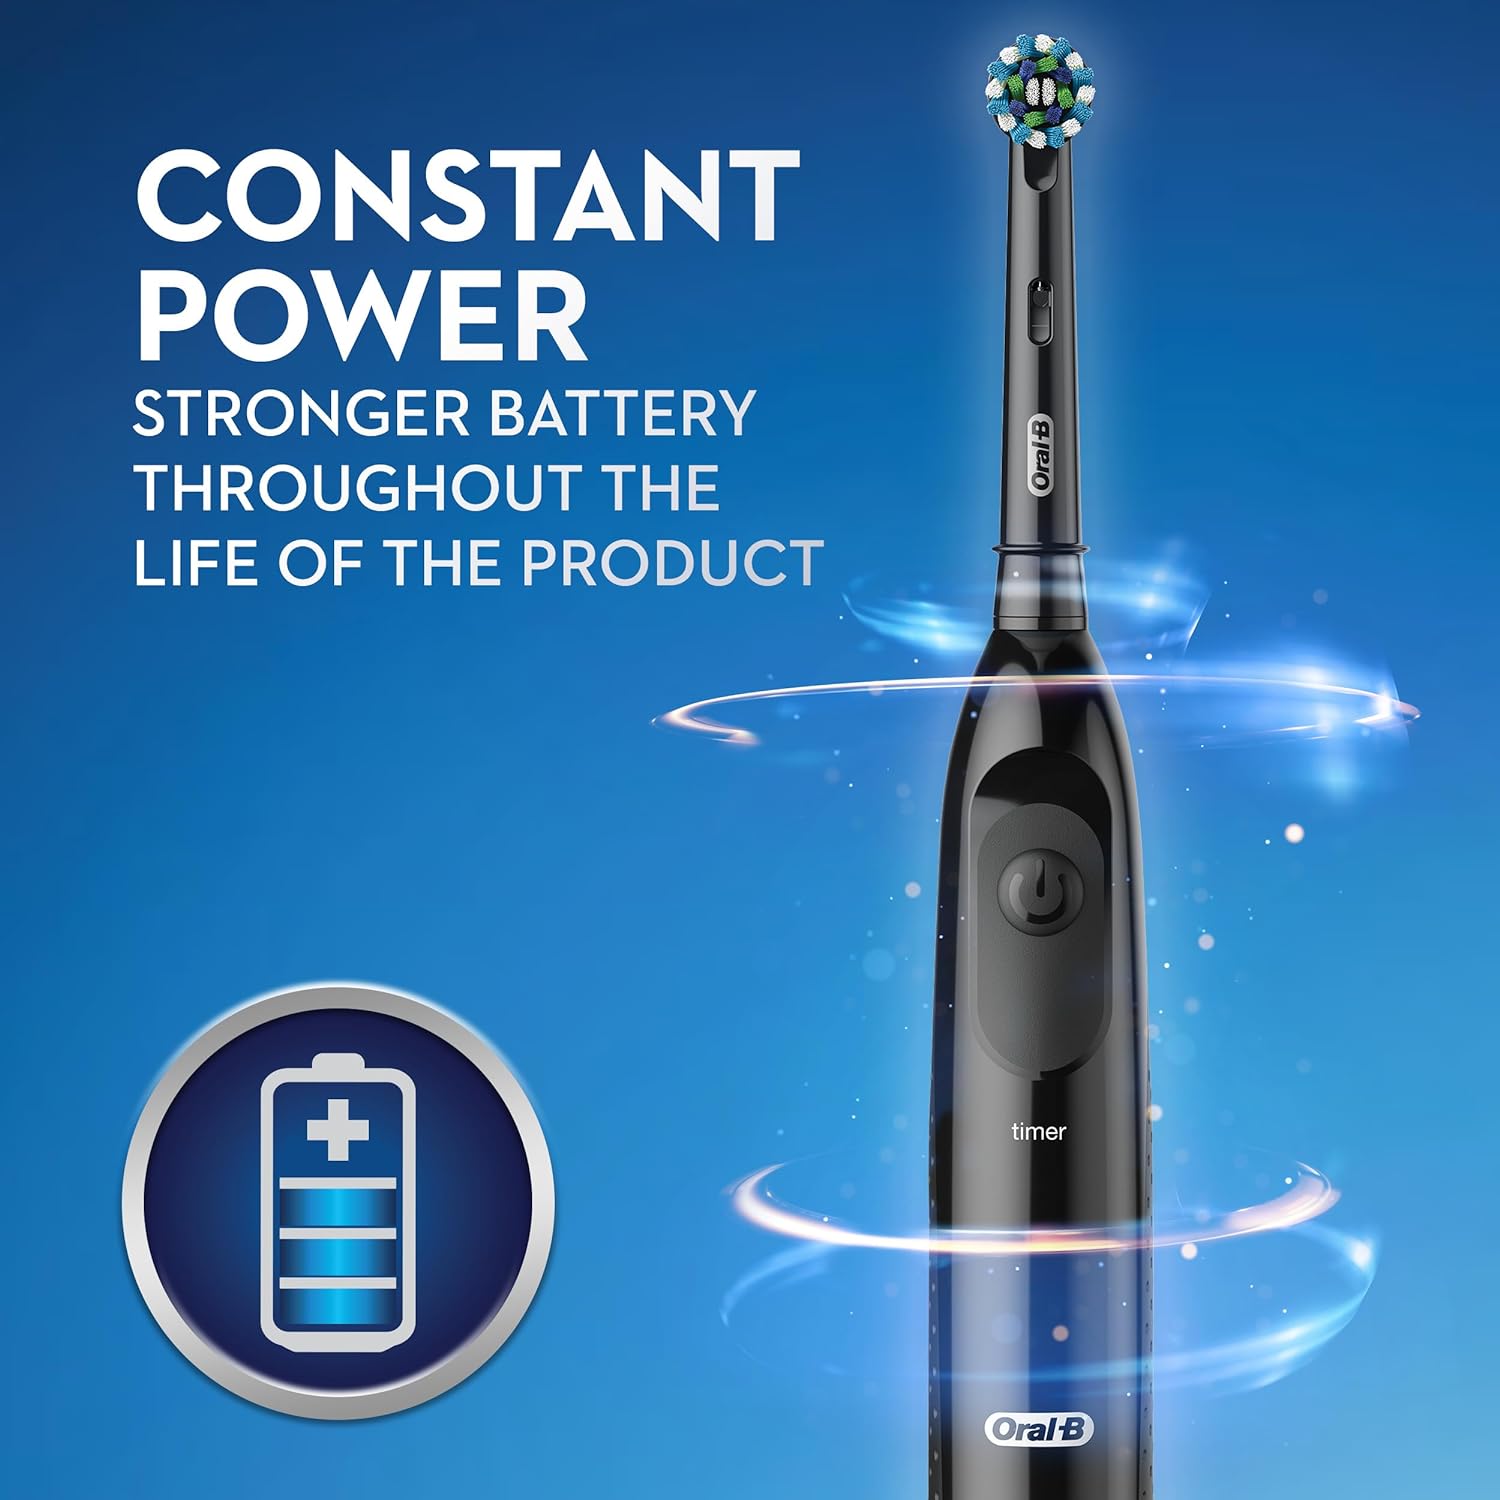 Oral-B Pro-Health Clinical, Superior Clean, Battery Power Electric Toothbrush, Black